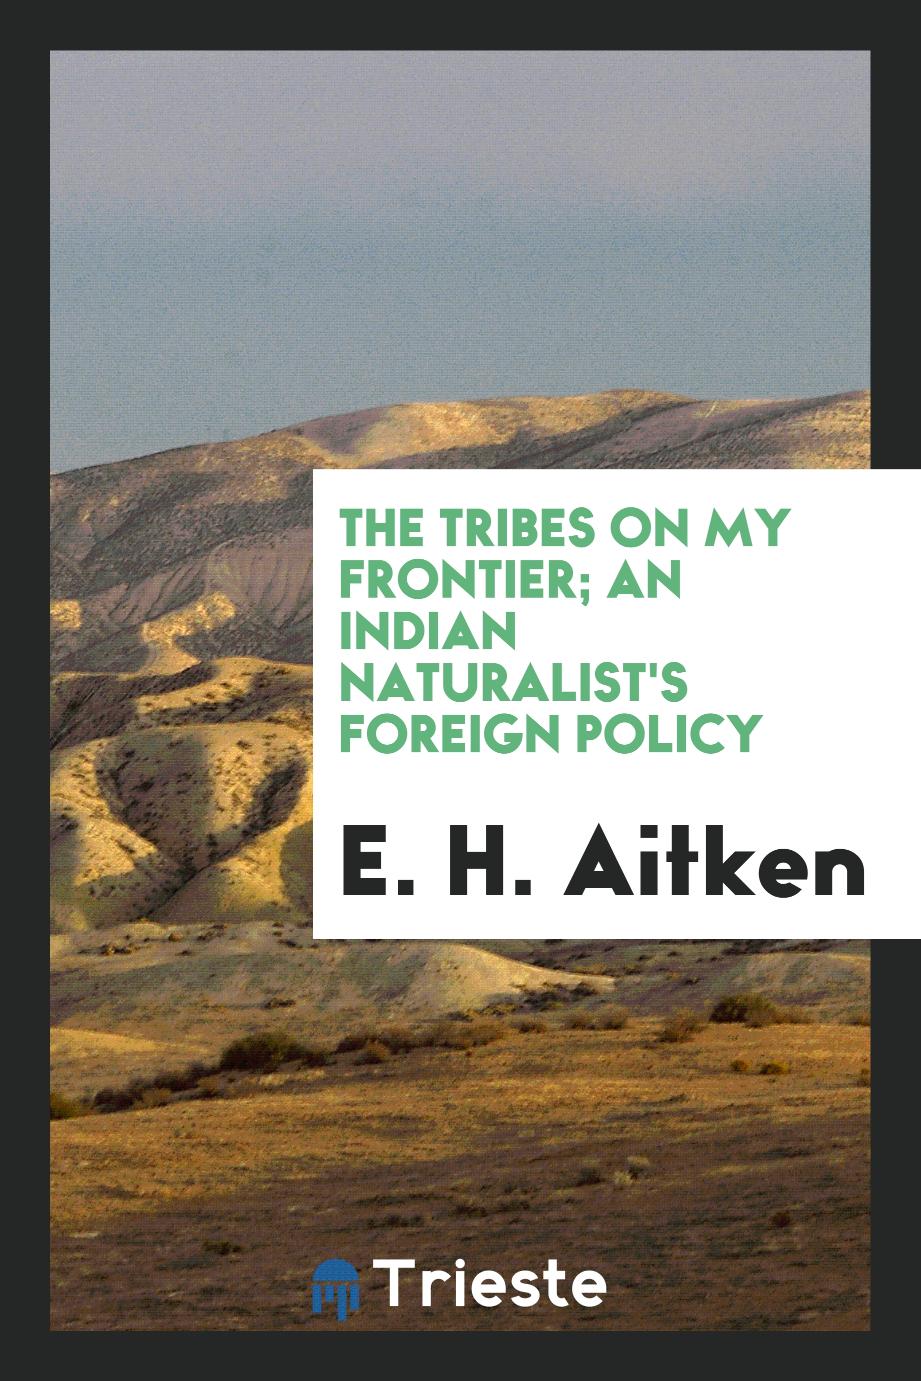 The tribes on my frontier; an Indian naturalist's foreign policy